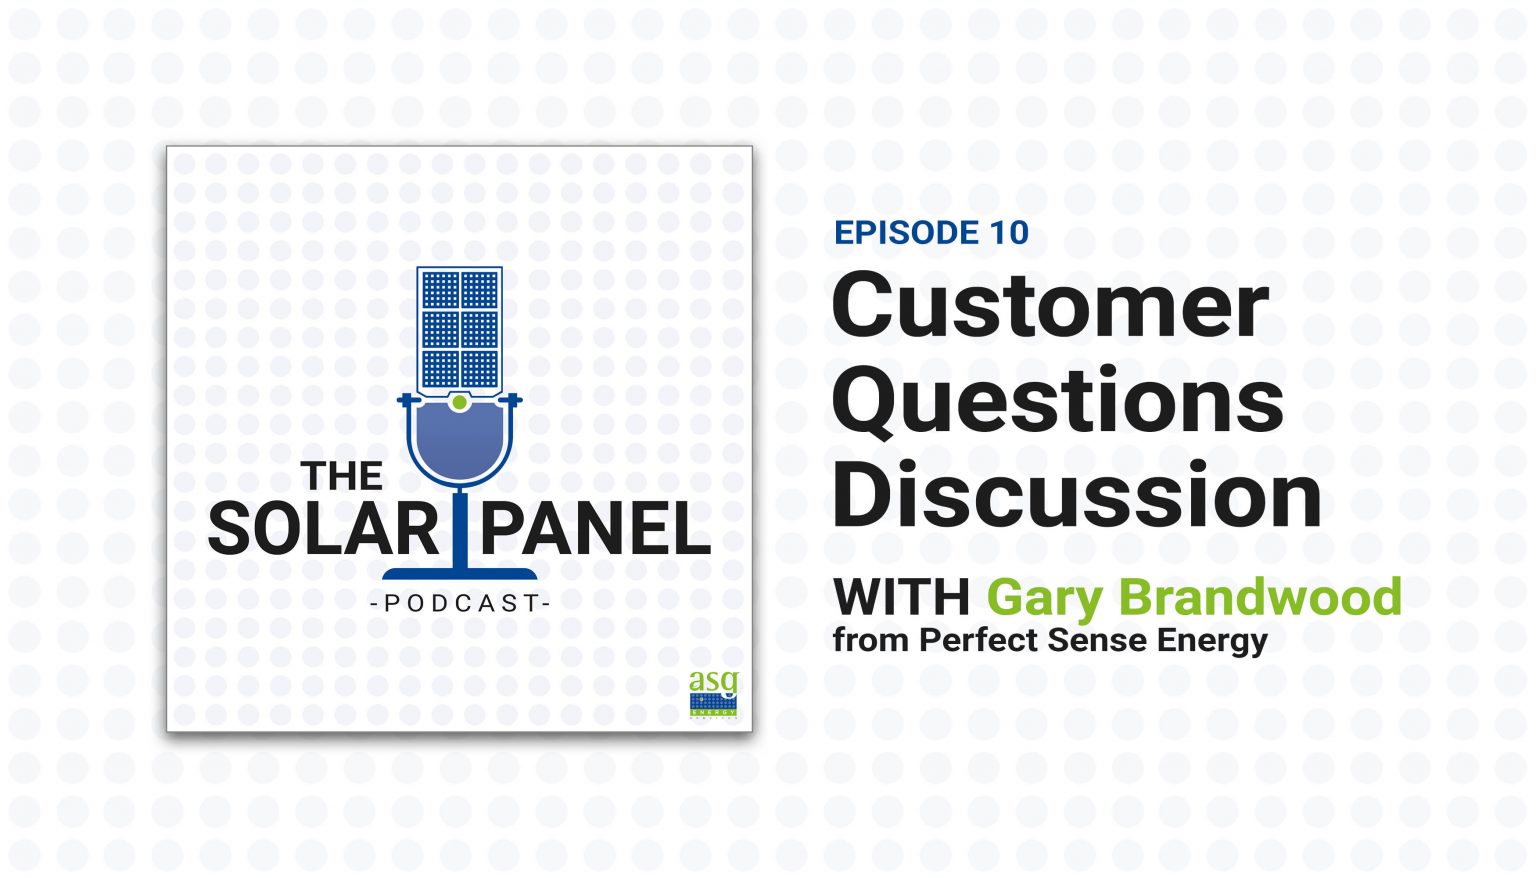 Episode card for "The Solar Panel podcast" with blue microphone icon, reading "Episode 10 Customer Questions Discussion with Gary Brandwood from Perfect Sense Energy"